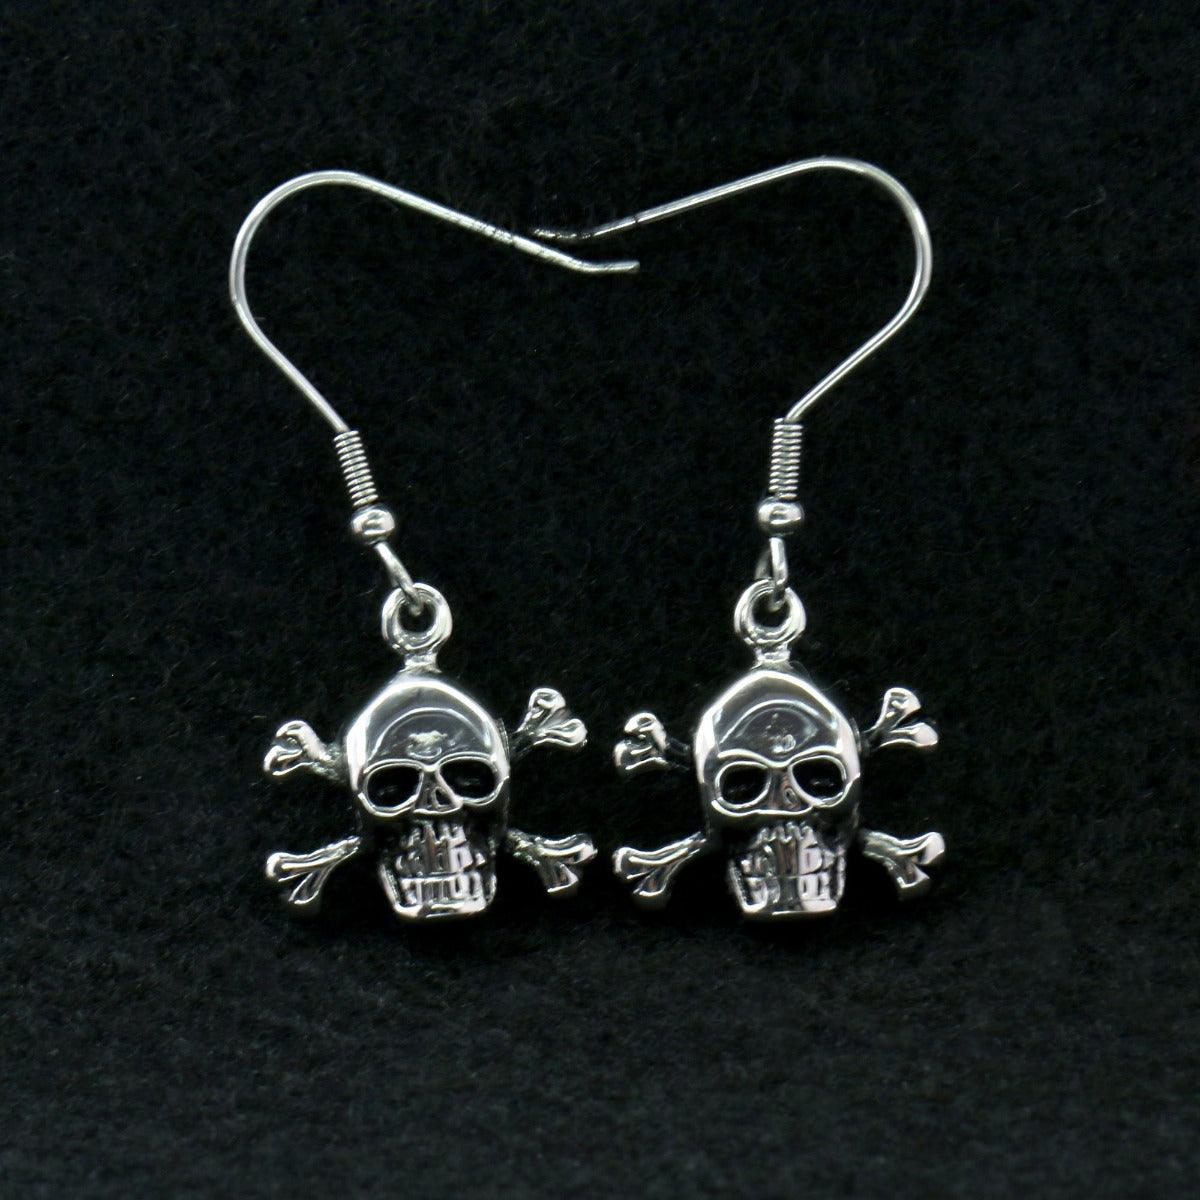 Hot Leathers Stainless Steel Skull And Crossbones Earrings - American Legend Rider